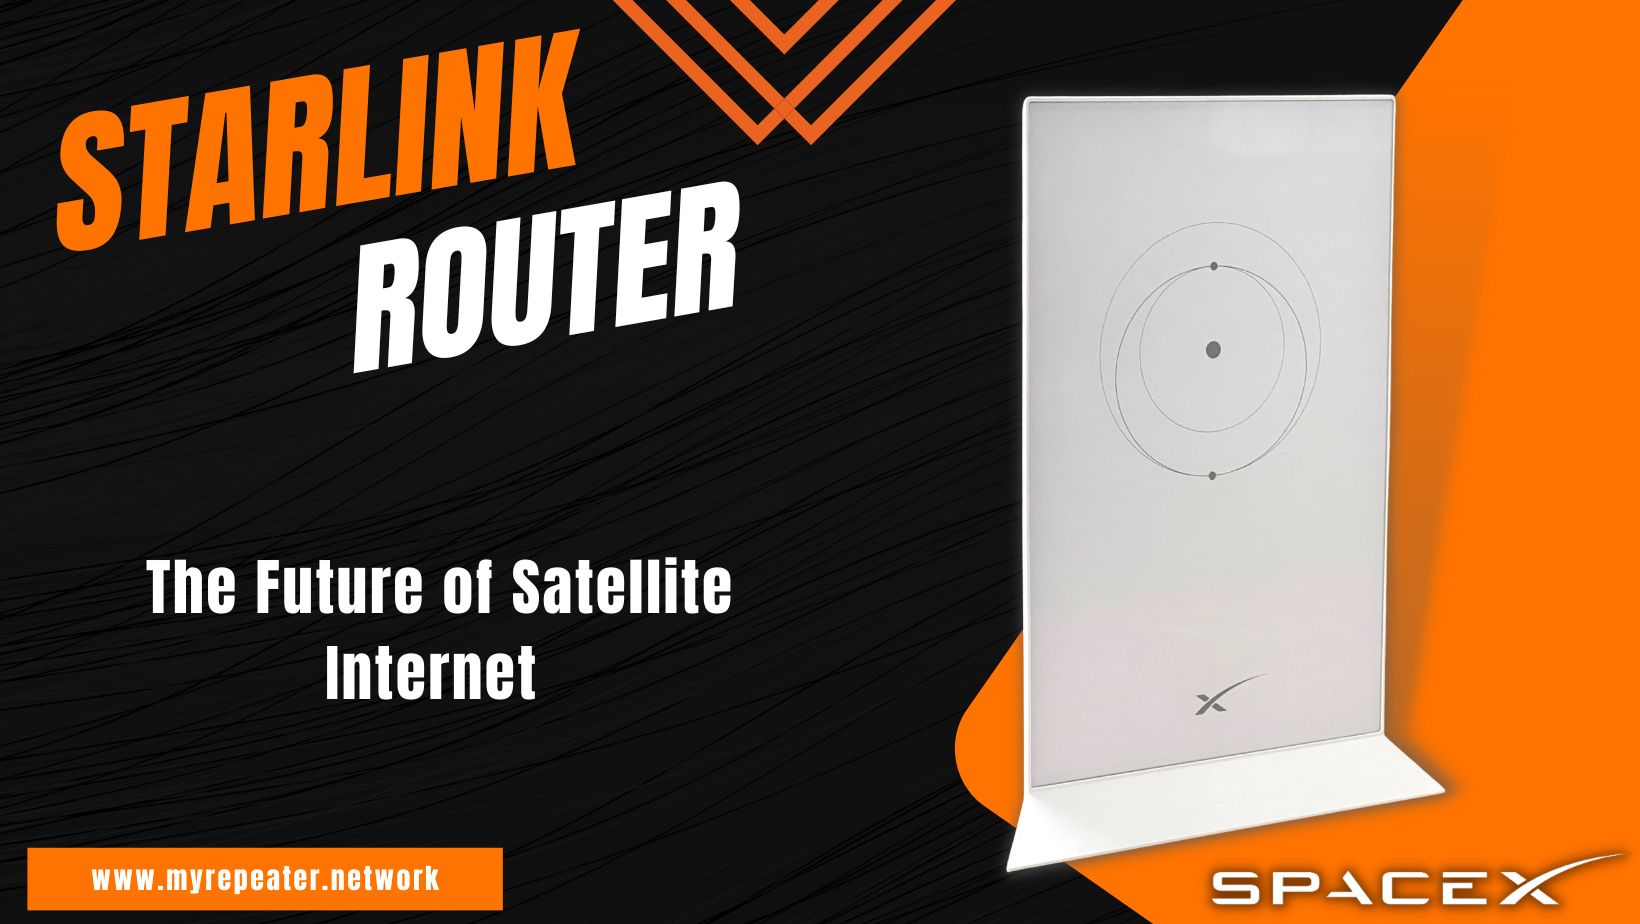 Starlink router